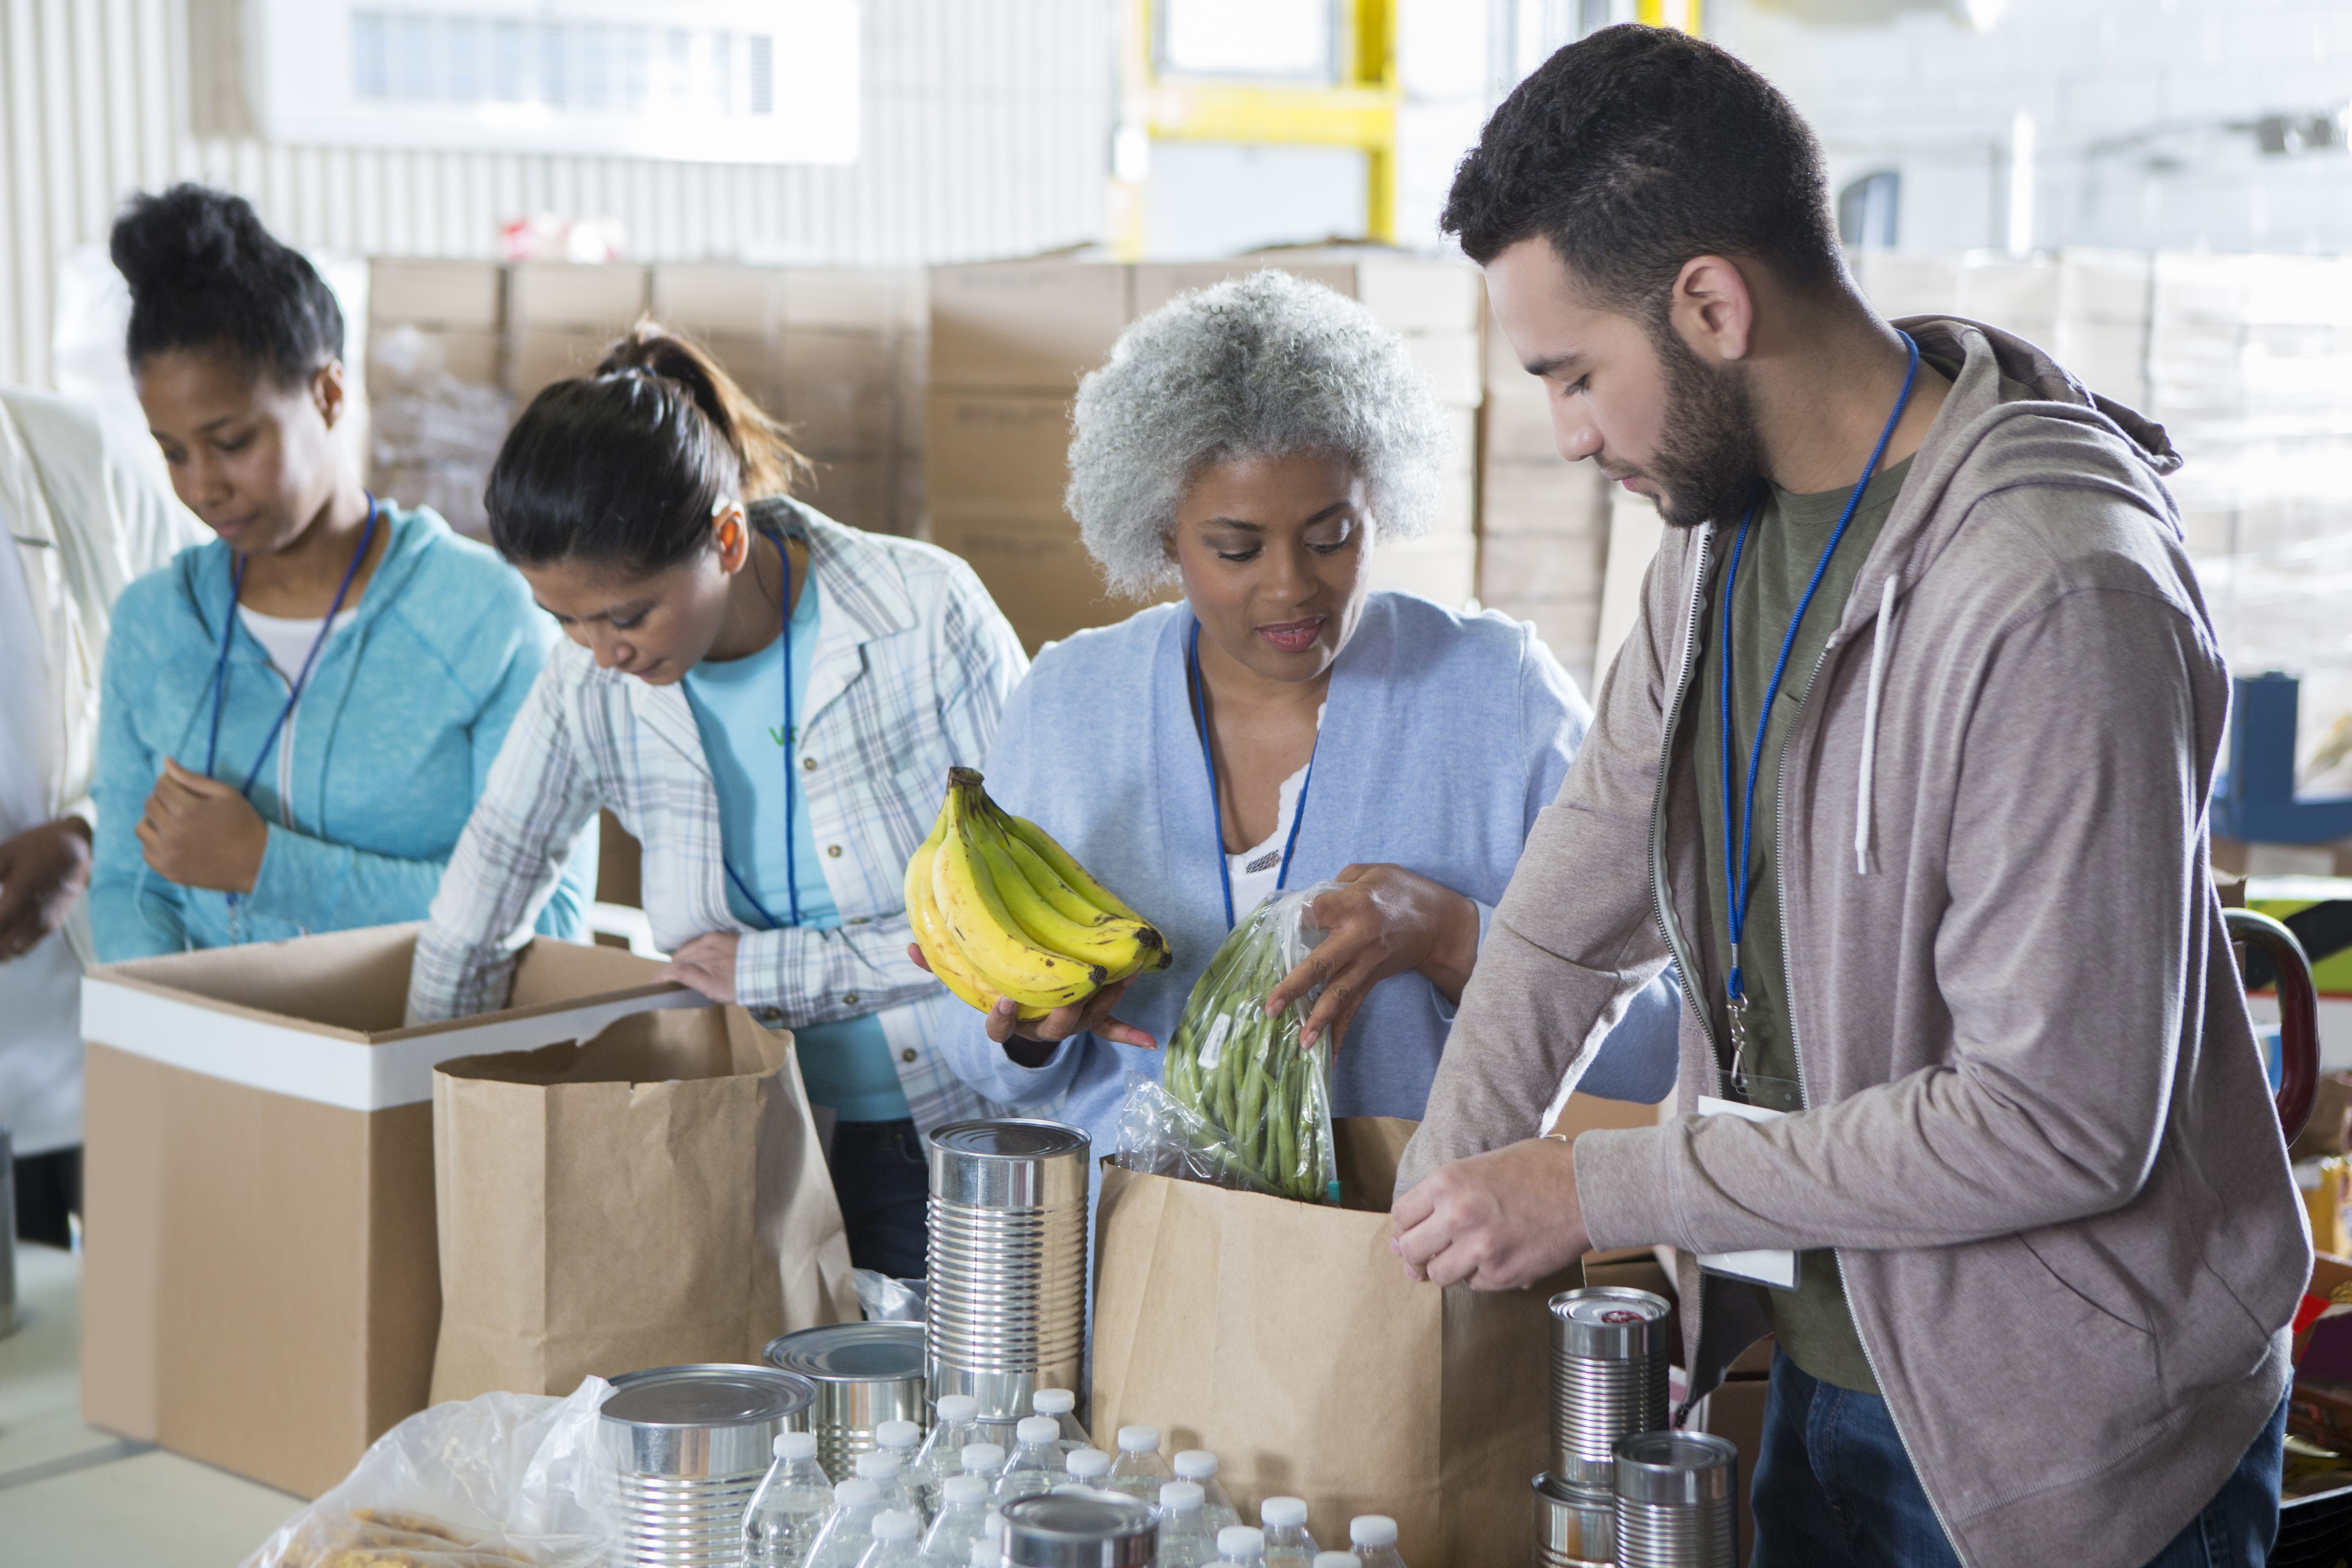 Curaleaf and Hytiva® Offer the Nation's Food-Insecure with Much-Needed Support